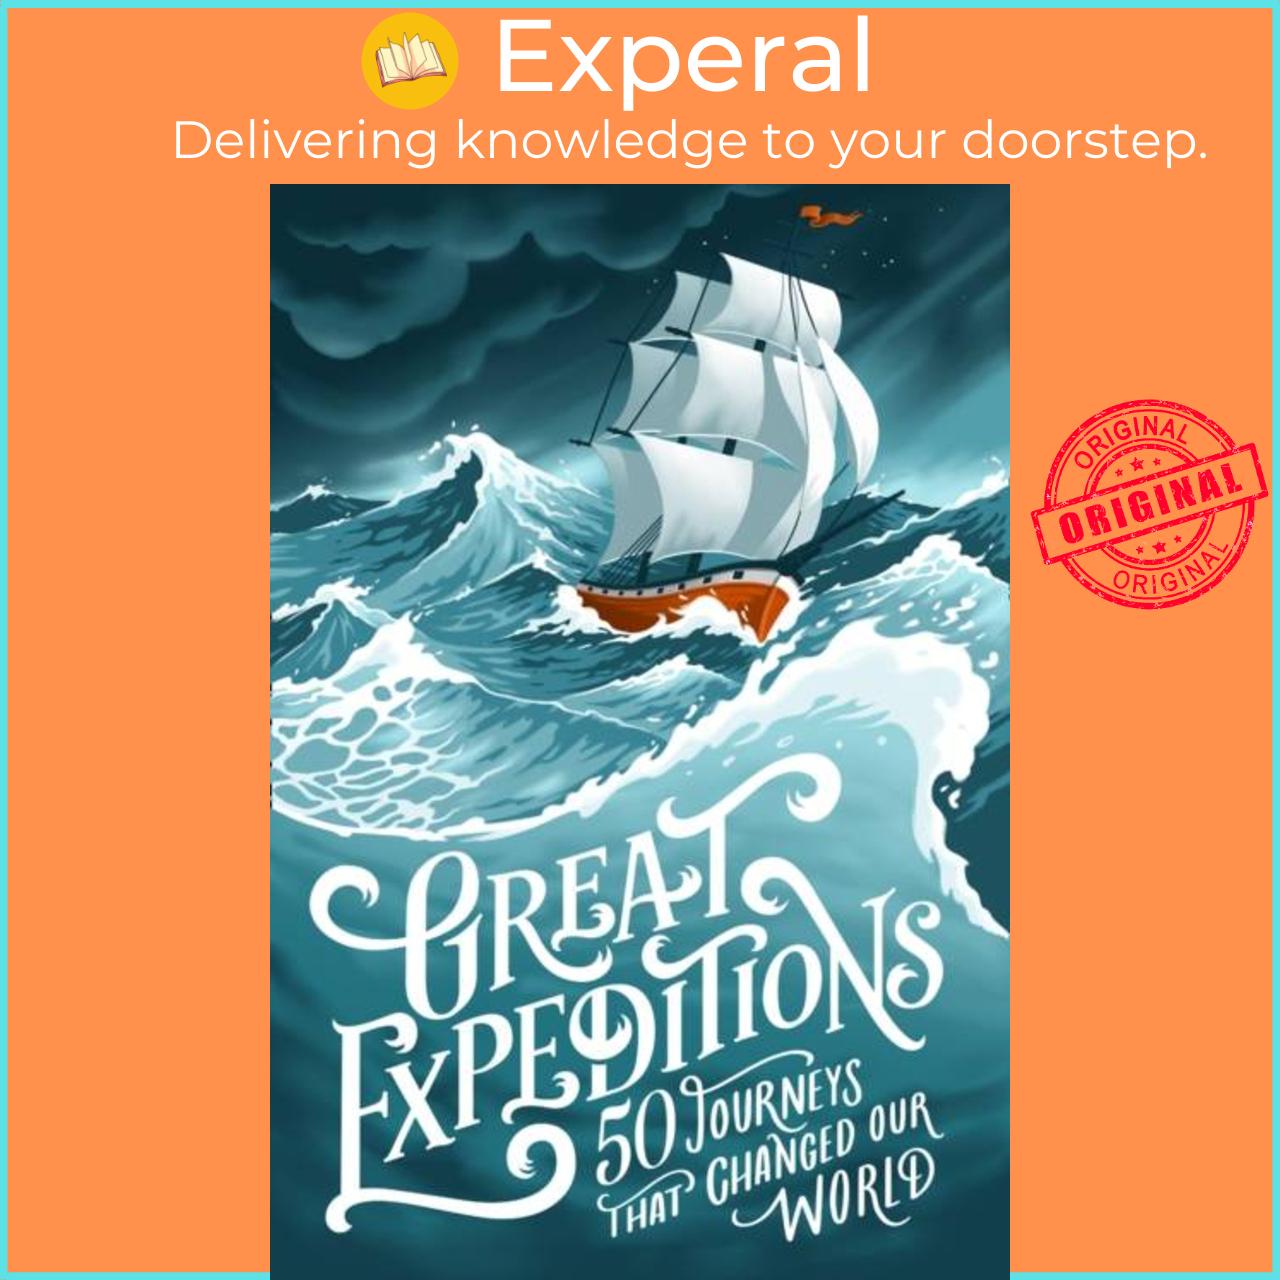 Sách - Great Expeditions - 50 Journeys That Changed Our World by Mark Steward (UK edition, paperback)